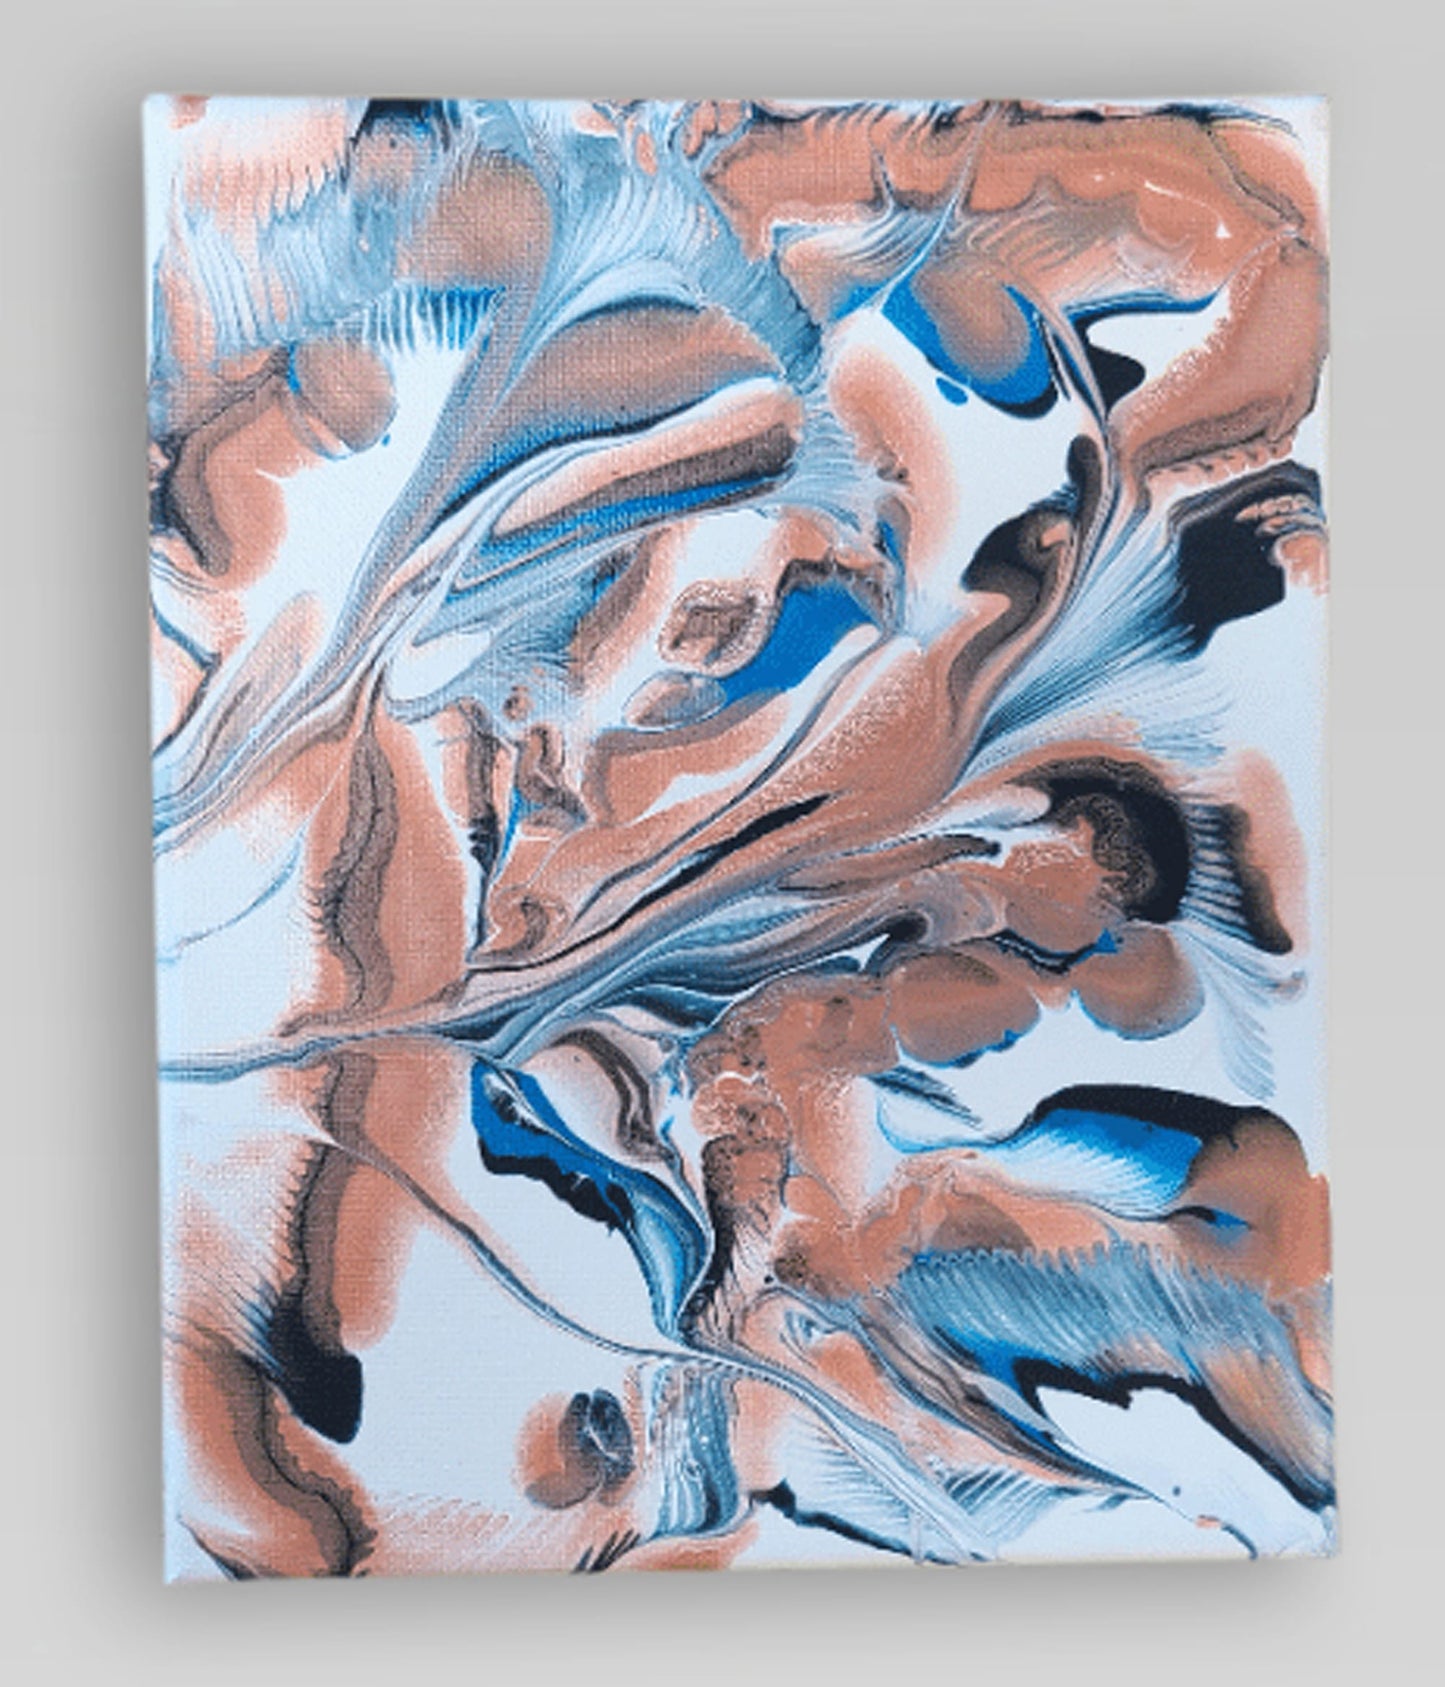 Skate Fan – 8 x 10 Acrylic Pour Painting On Canvas